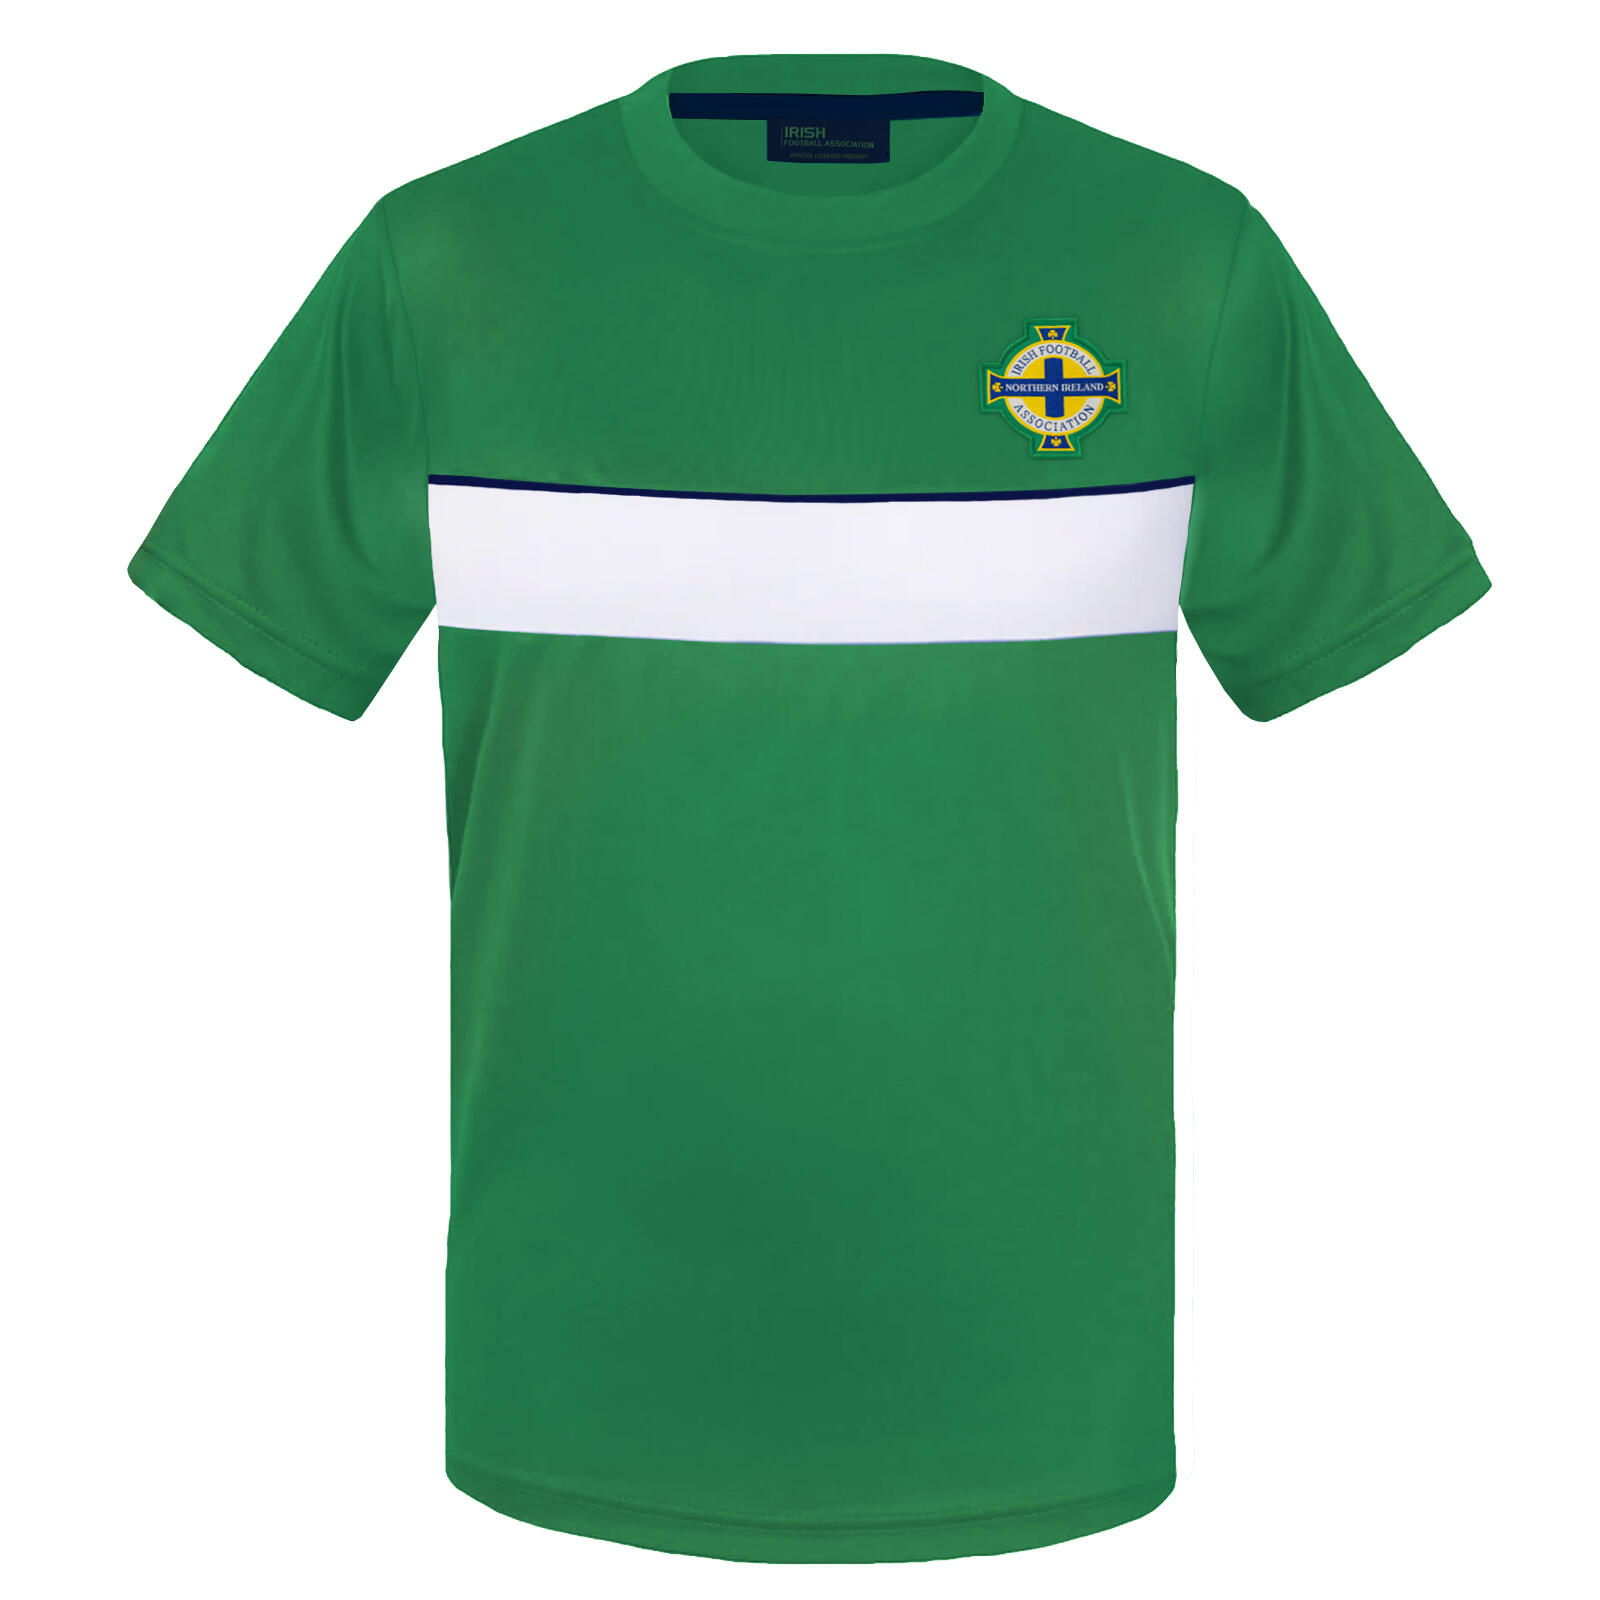 Northern Ireland Mens T-Shirt Poly Tech Training Kit OFFICIAL Football Gift 1/2